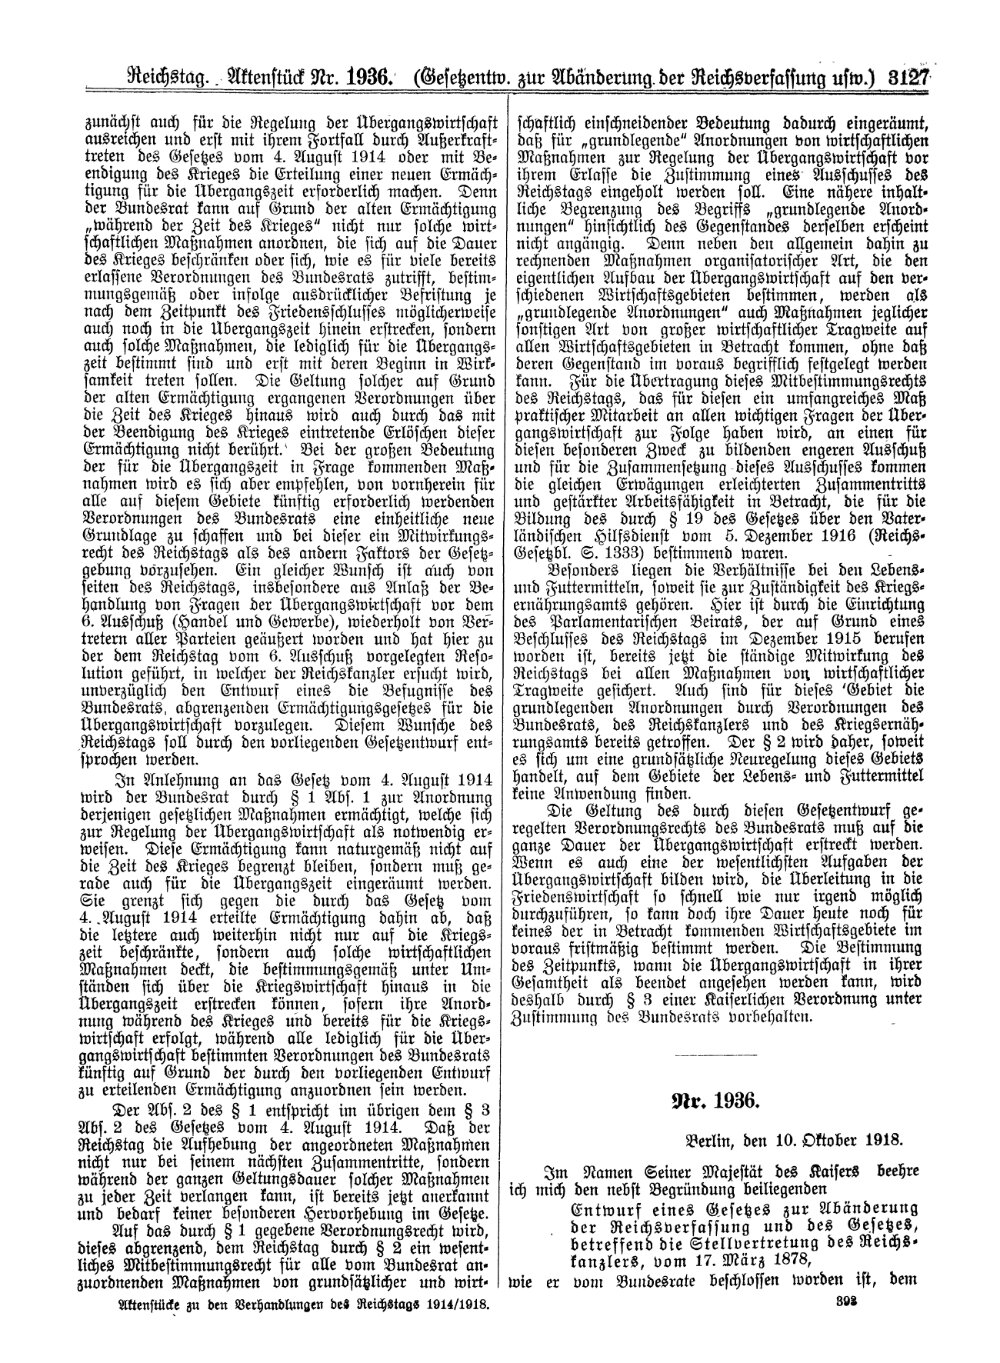 Scan of page 3127